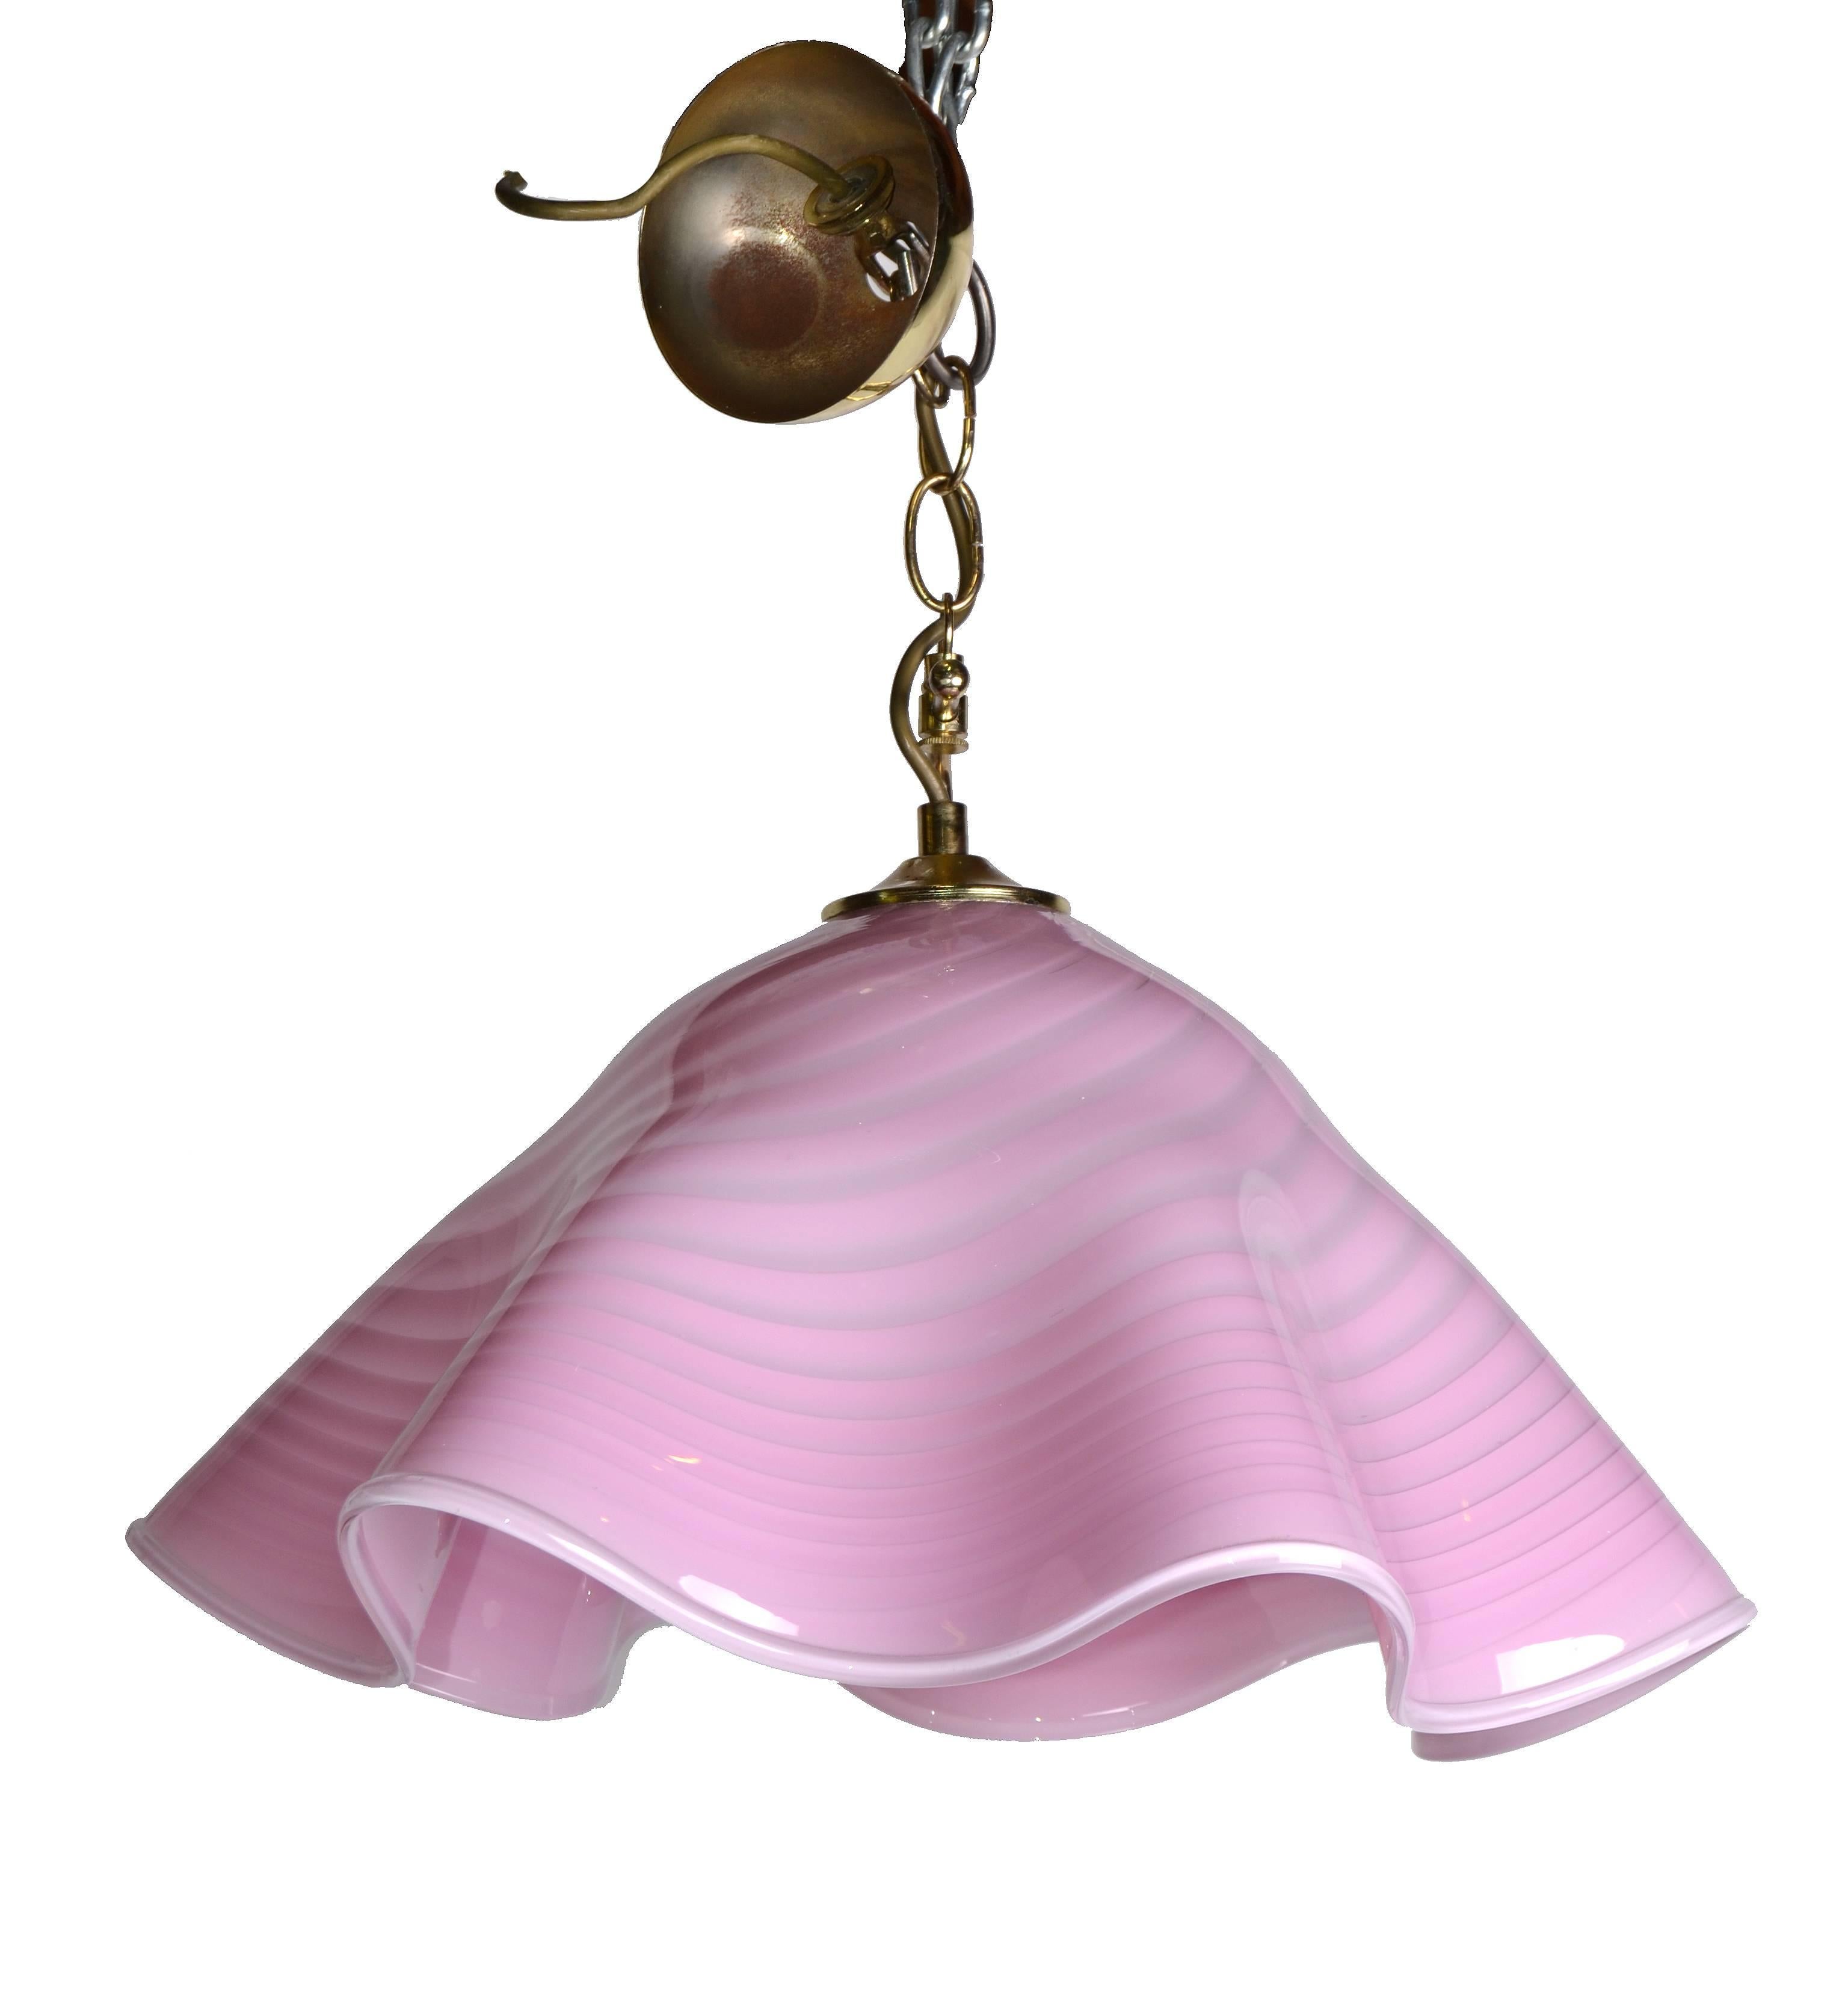 Modernist Murano glass handkerchief chandelier. This striking Mid-Century Modernist Murano chandelier features a handblown pink Murano glass handkerchief form with brass fittings.
Will be rewired prior shipping and uses a max. 60 wattage light